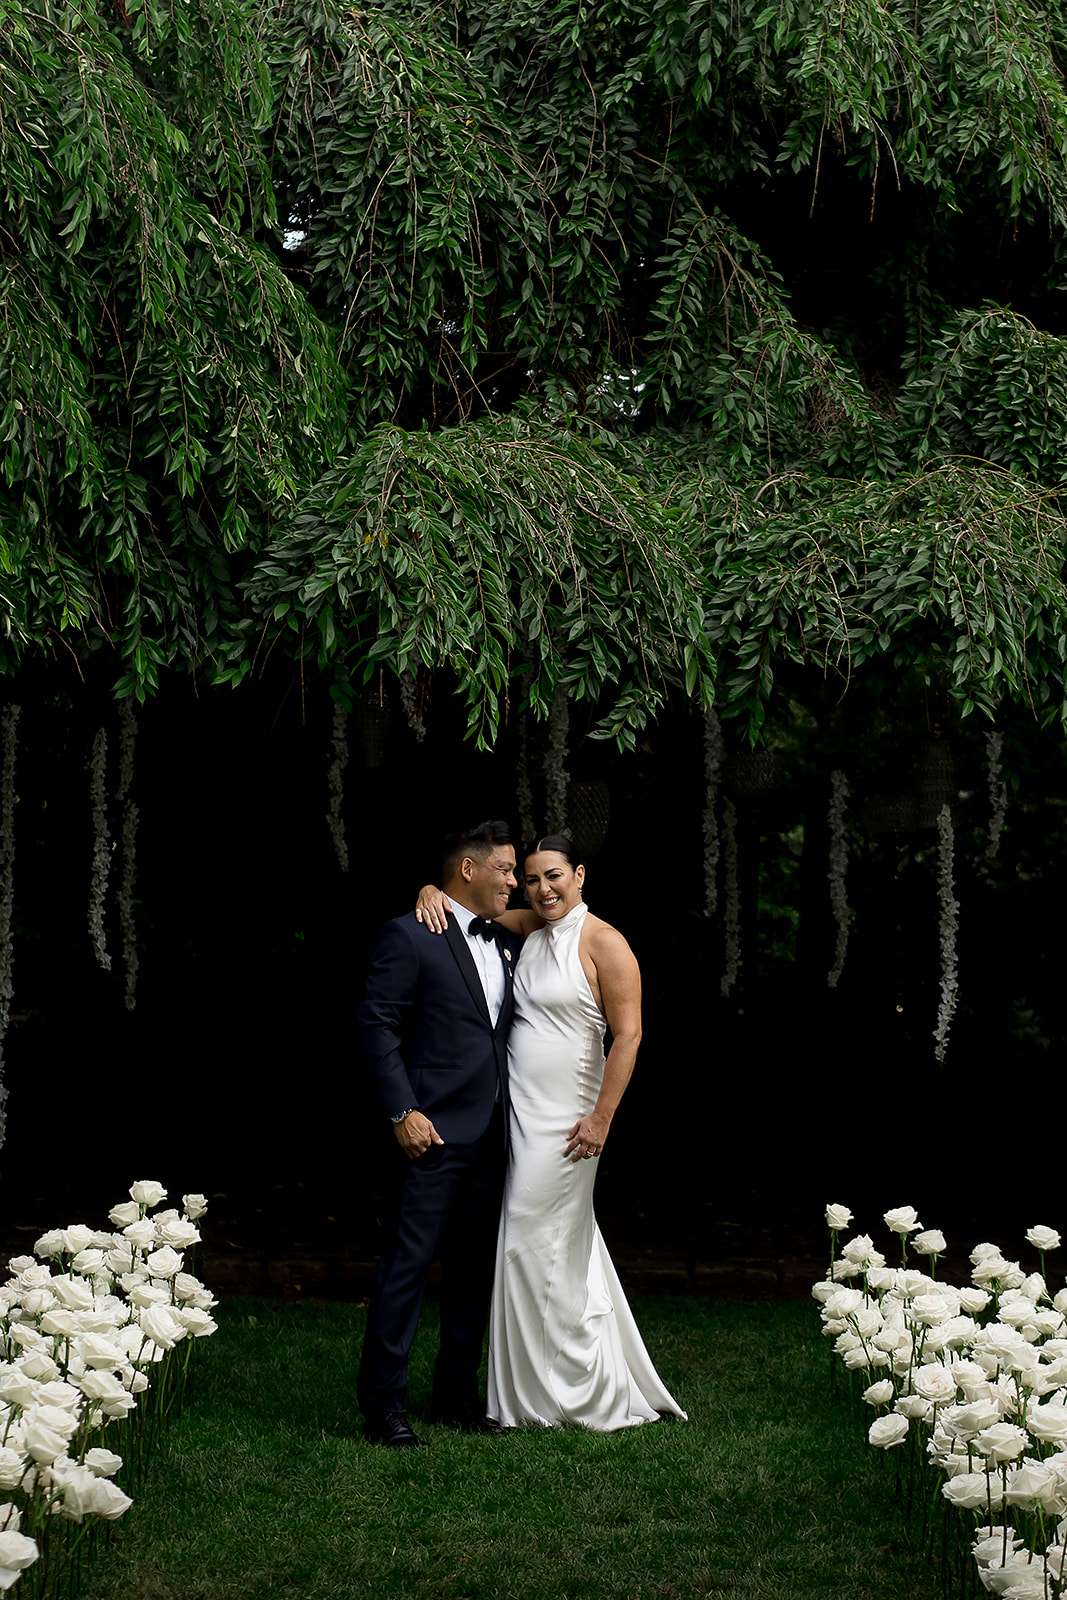 Bride and groom under a lush ceremony tree with white roses on either side of the aisle.